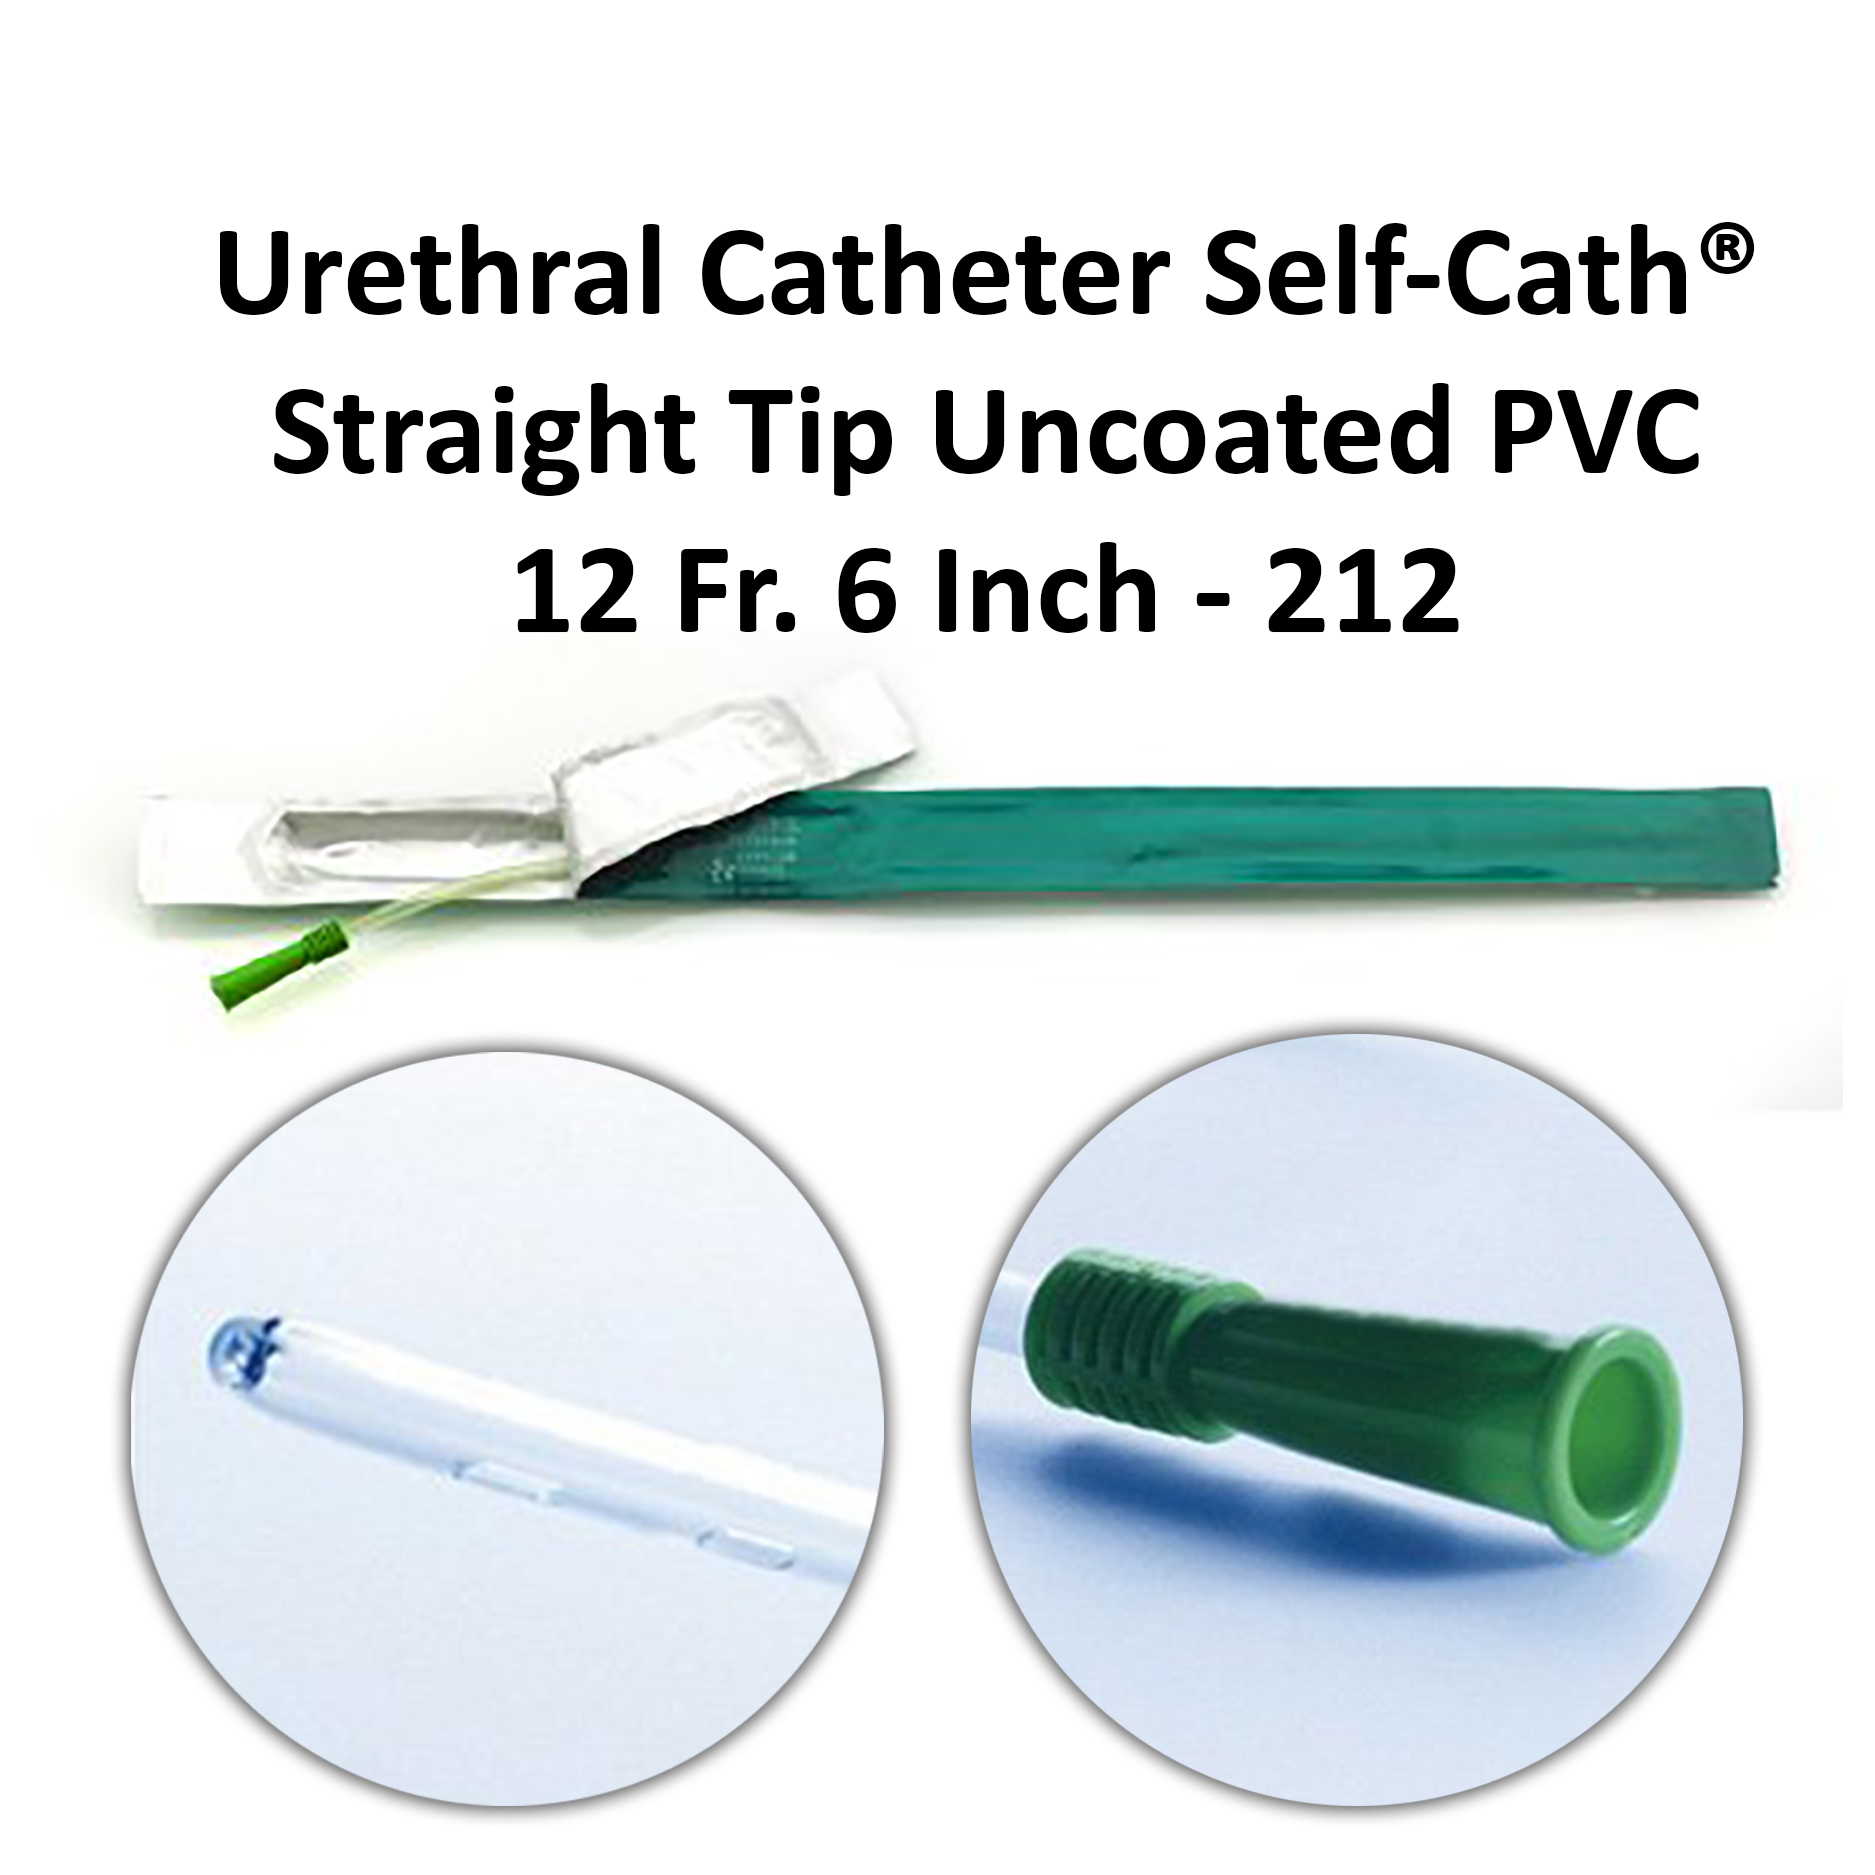 Urethral Catheter Self-Cath® Straight Tip Uncoated PVC 12 Fr. 6 Inch - 212